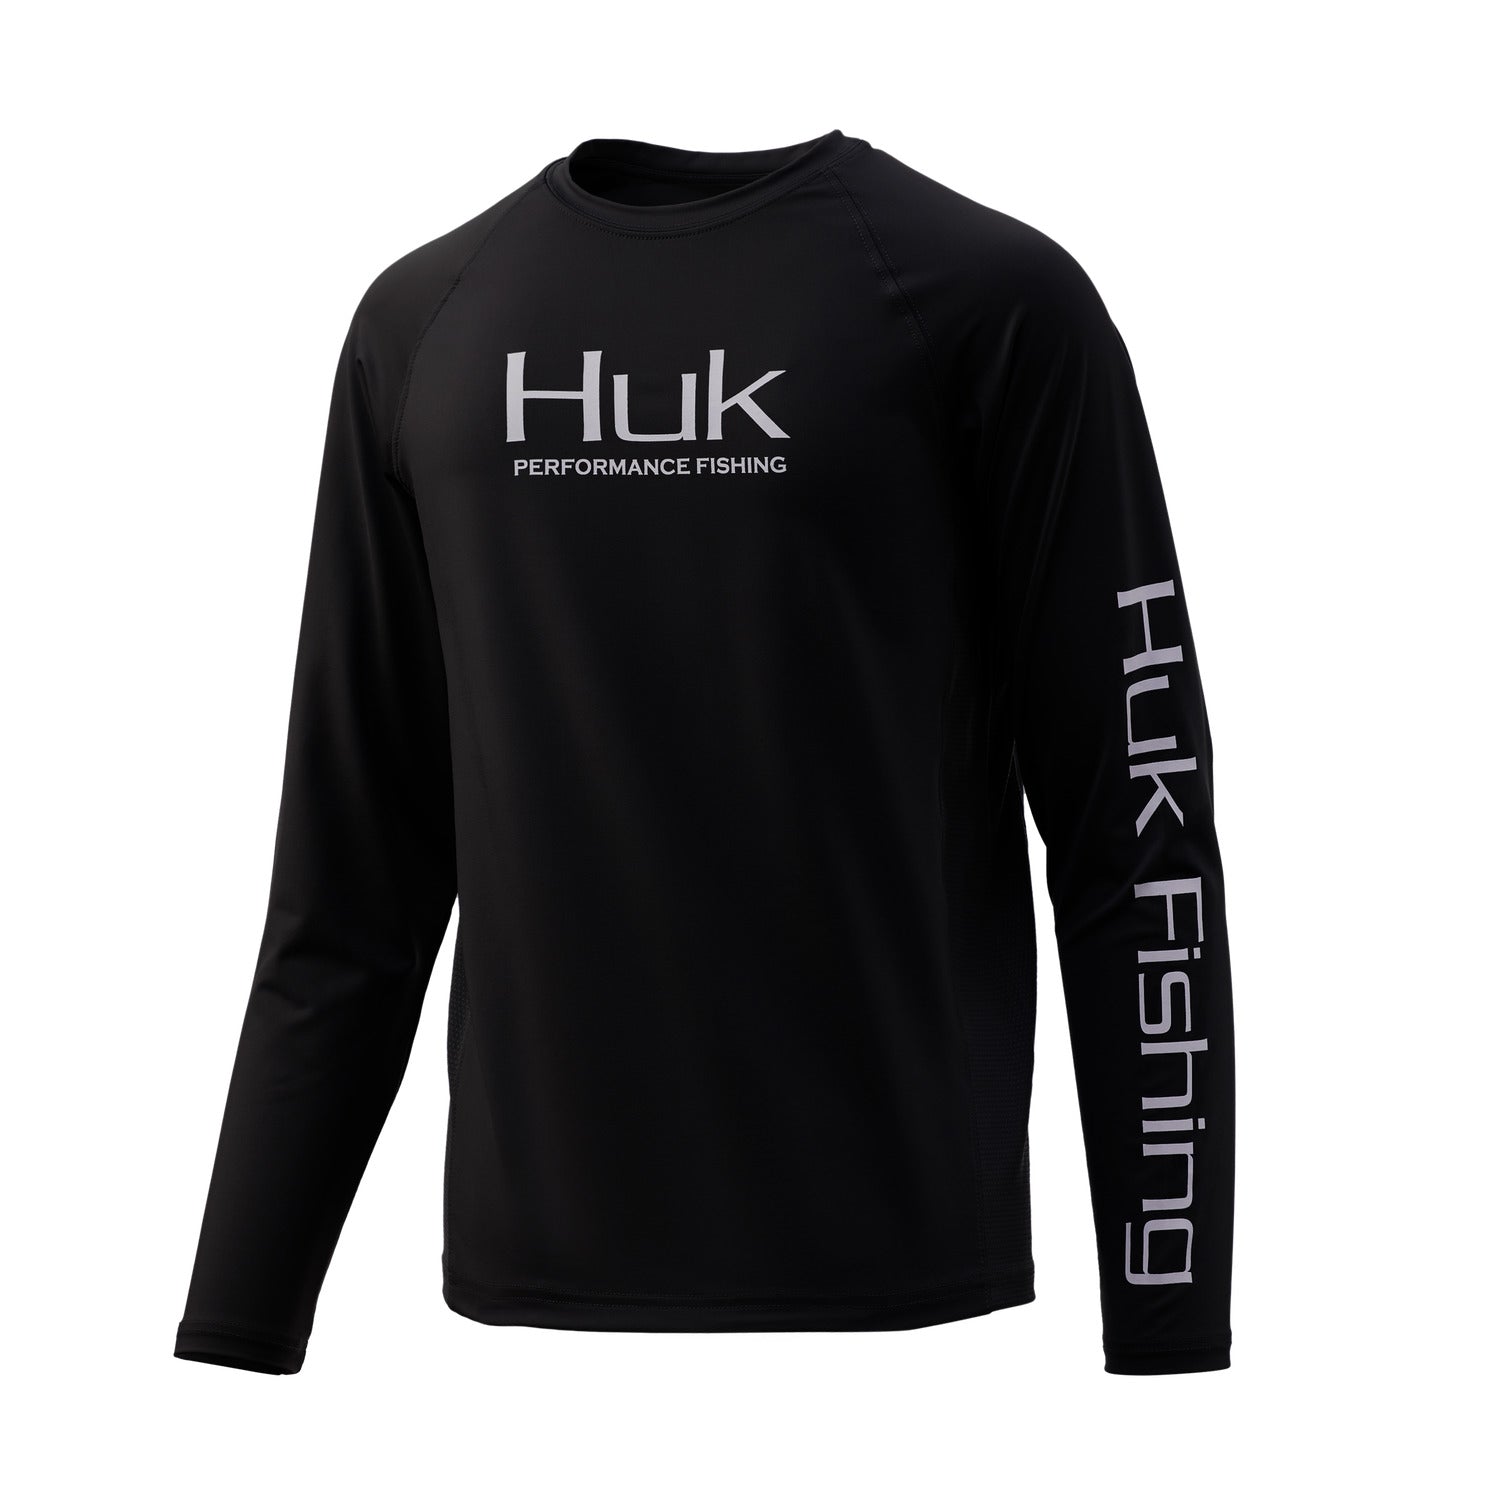 Huk Youth Pursuit Vented Long Sleeve Shirt H7120016 Youth Large, Black